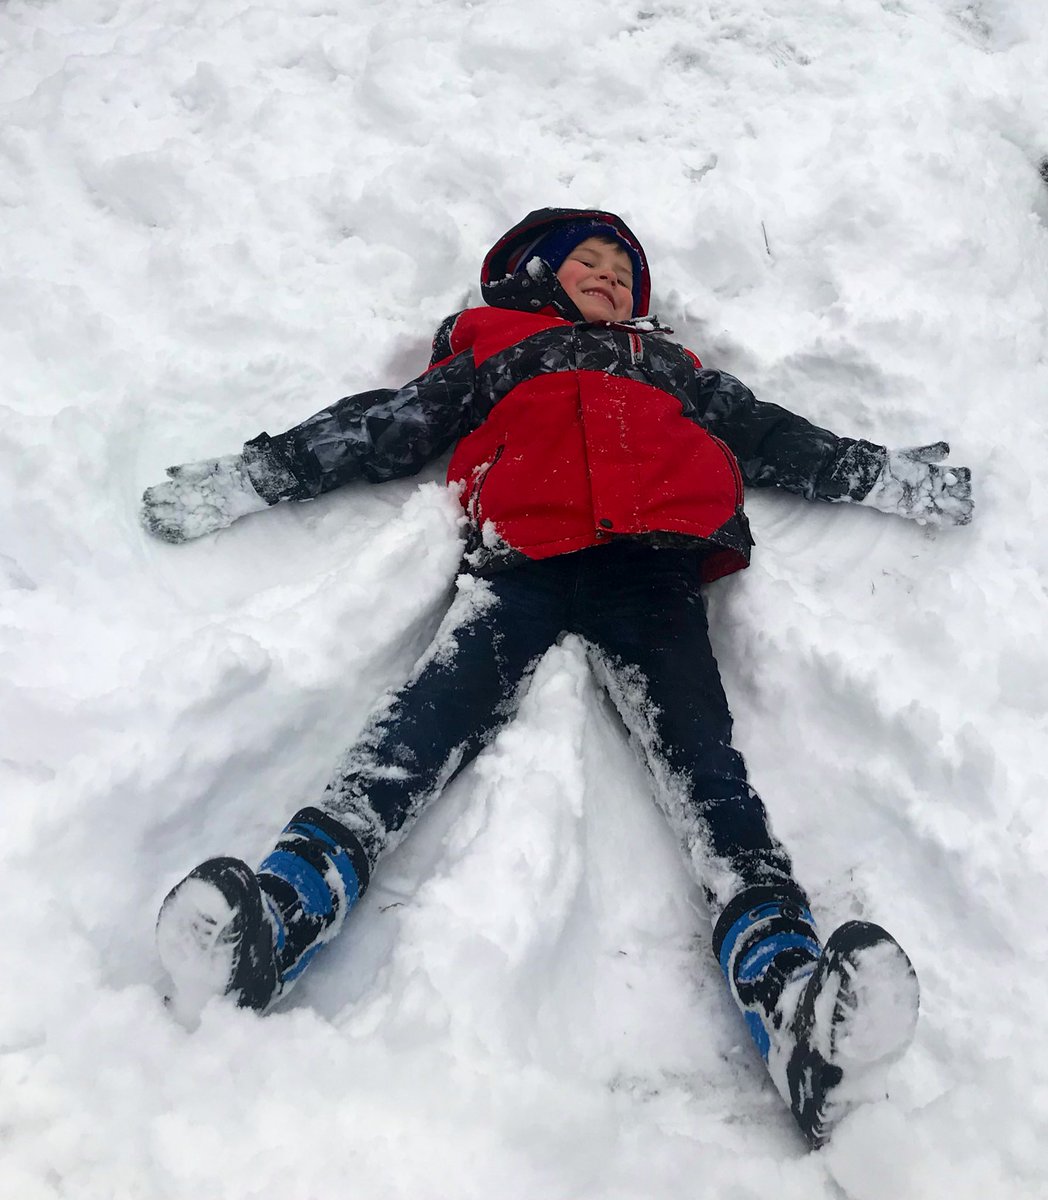 RT @ErikaHope2012: Snow days with my son #DoWhatYouLove https://t.co/dpBiUfZN2w